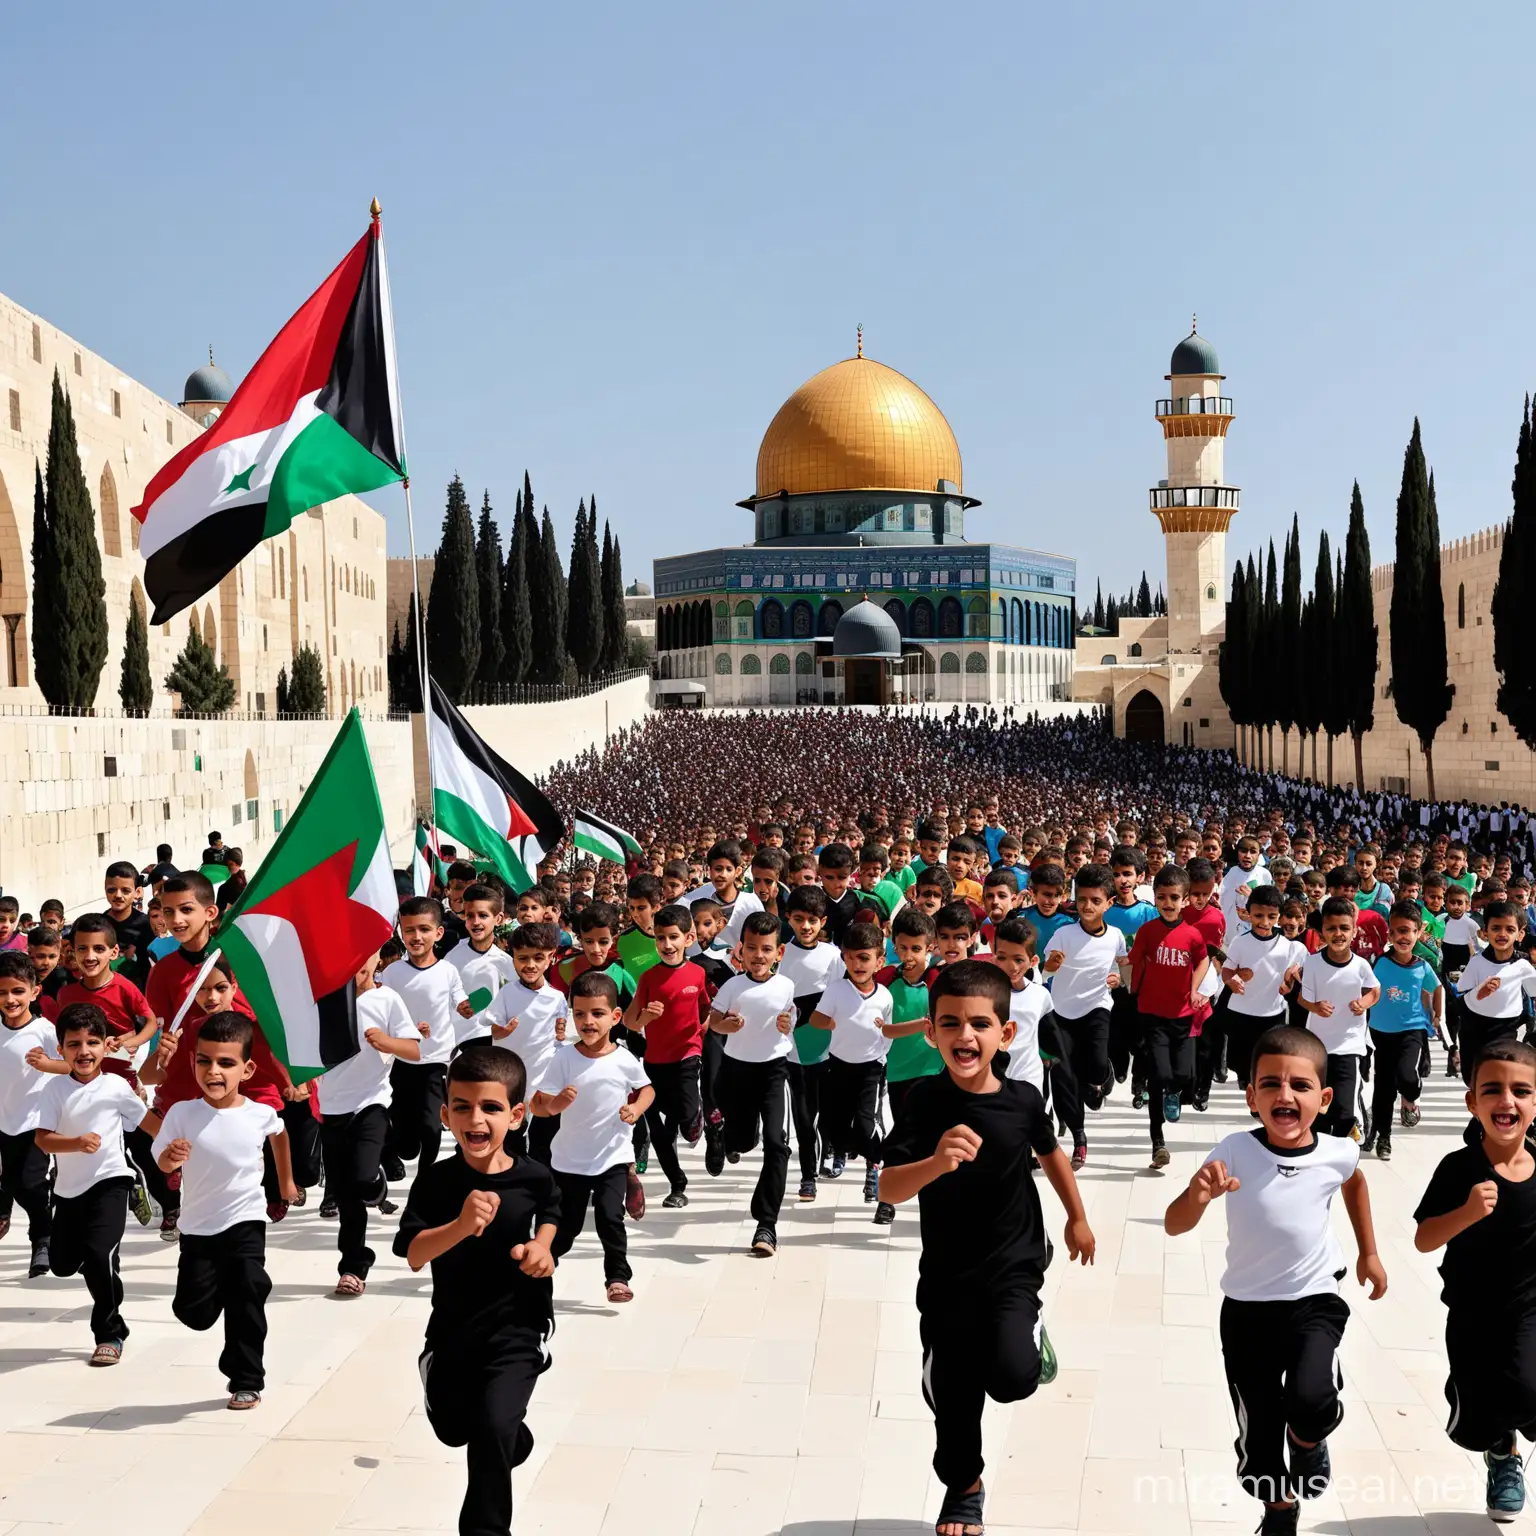 Children Running Towards AlAqsa Mosque with Palestinian Flags